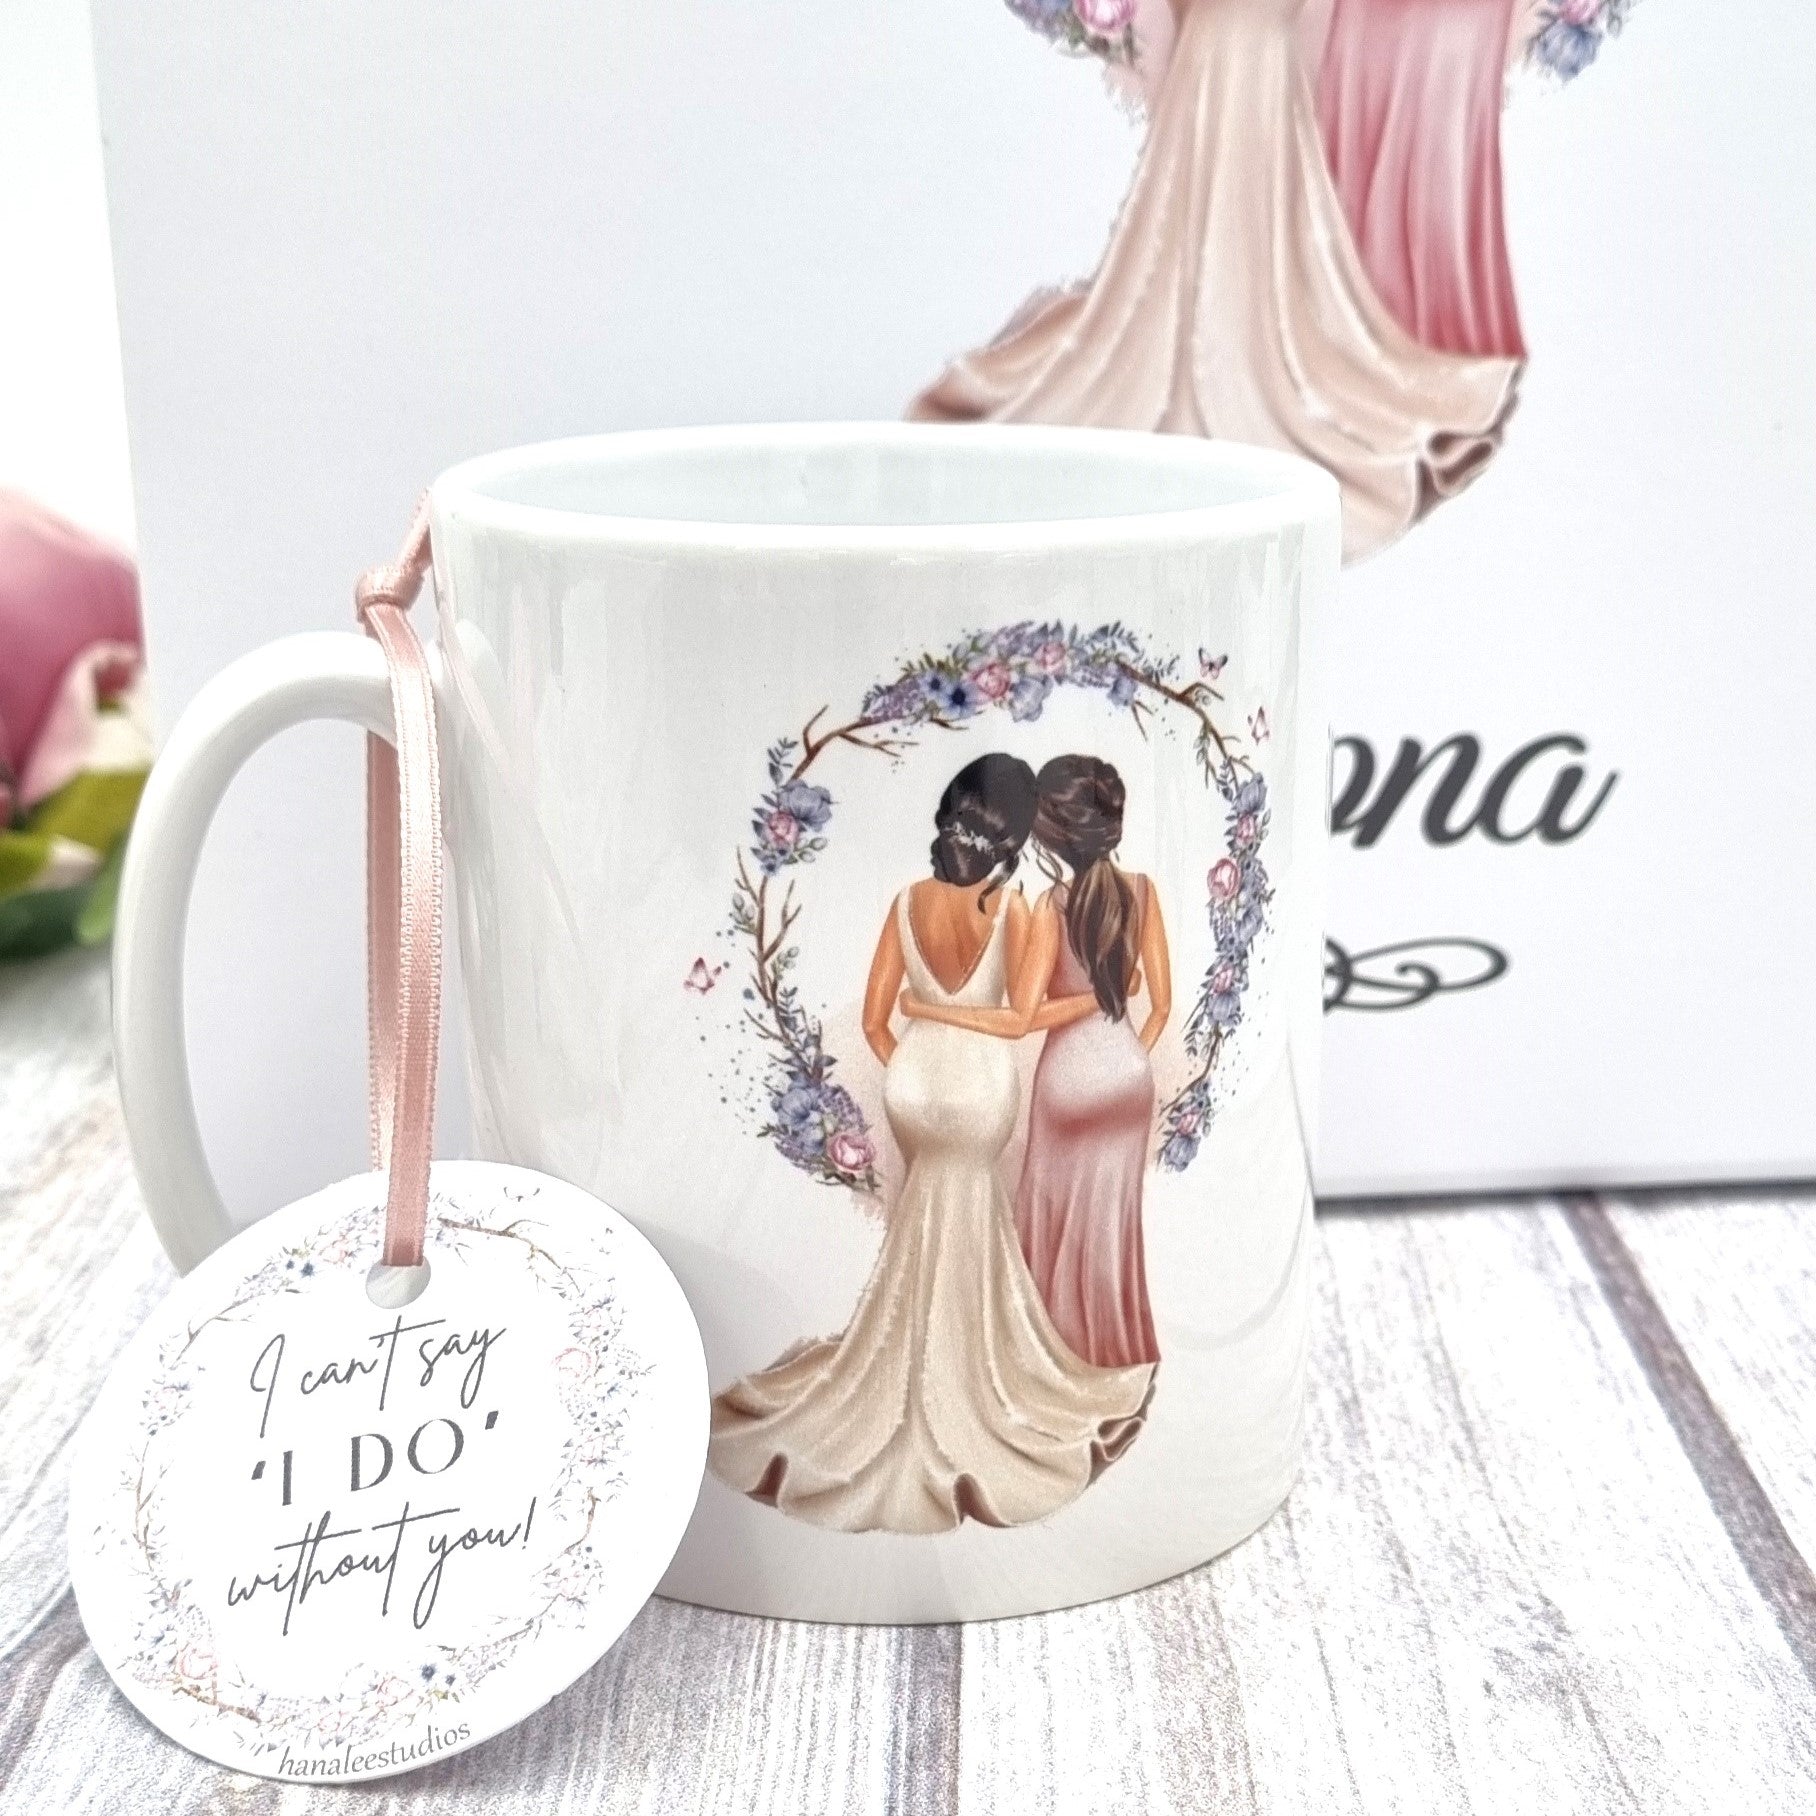 Can't say I do without you personalised mug